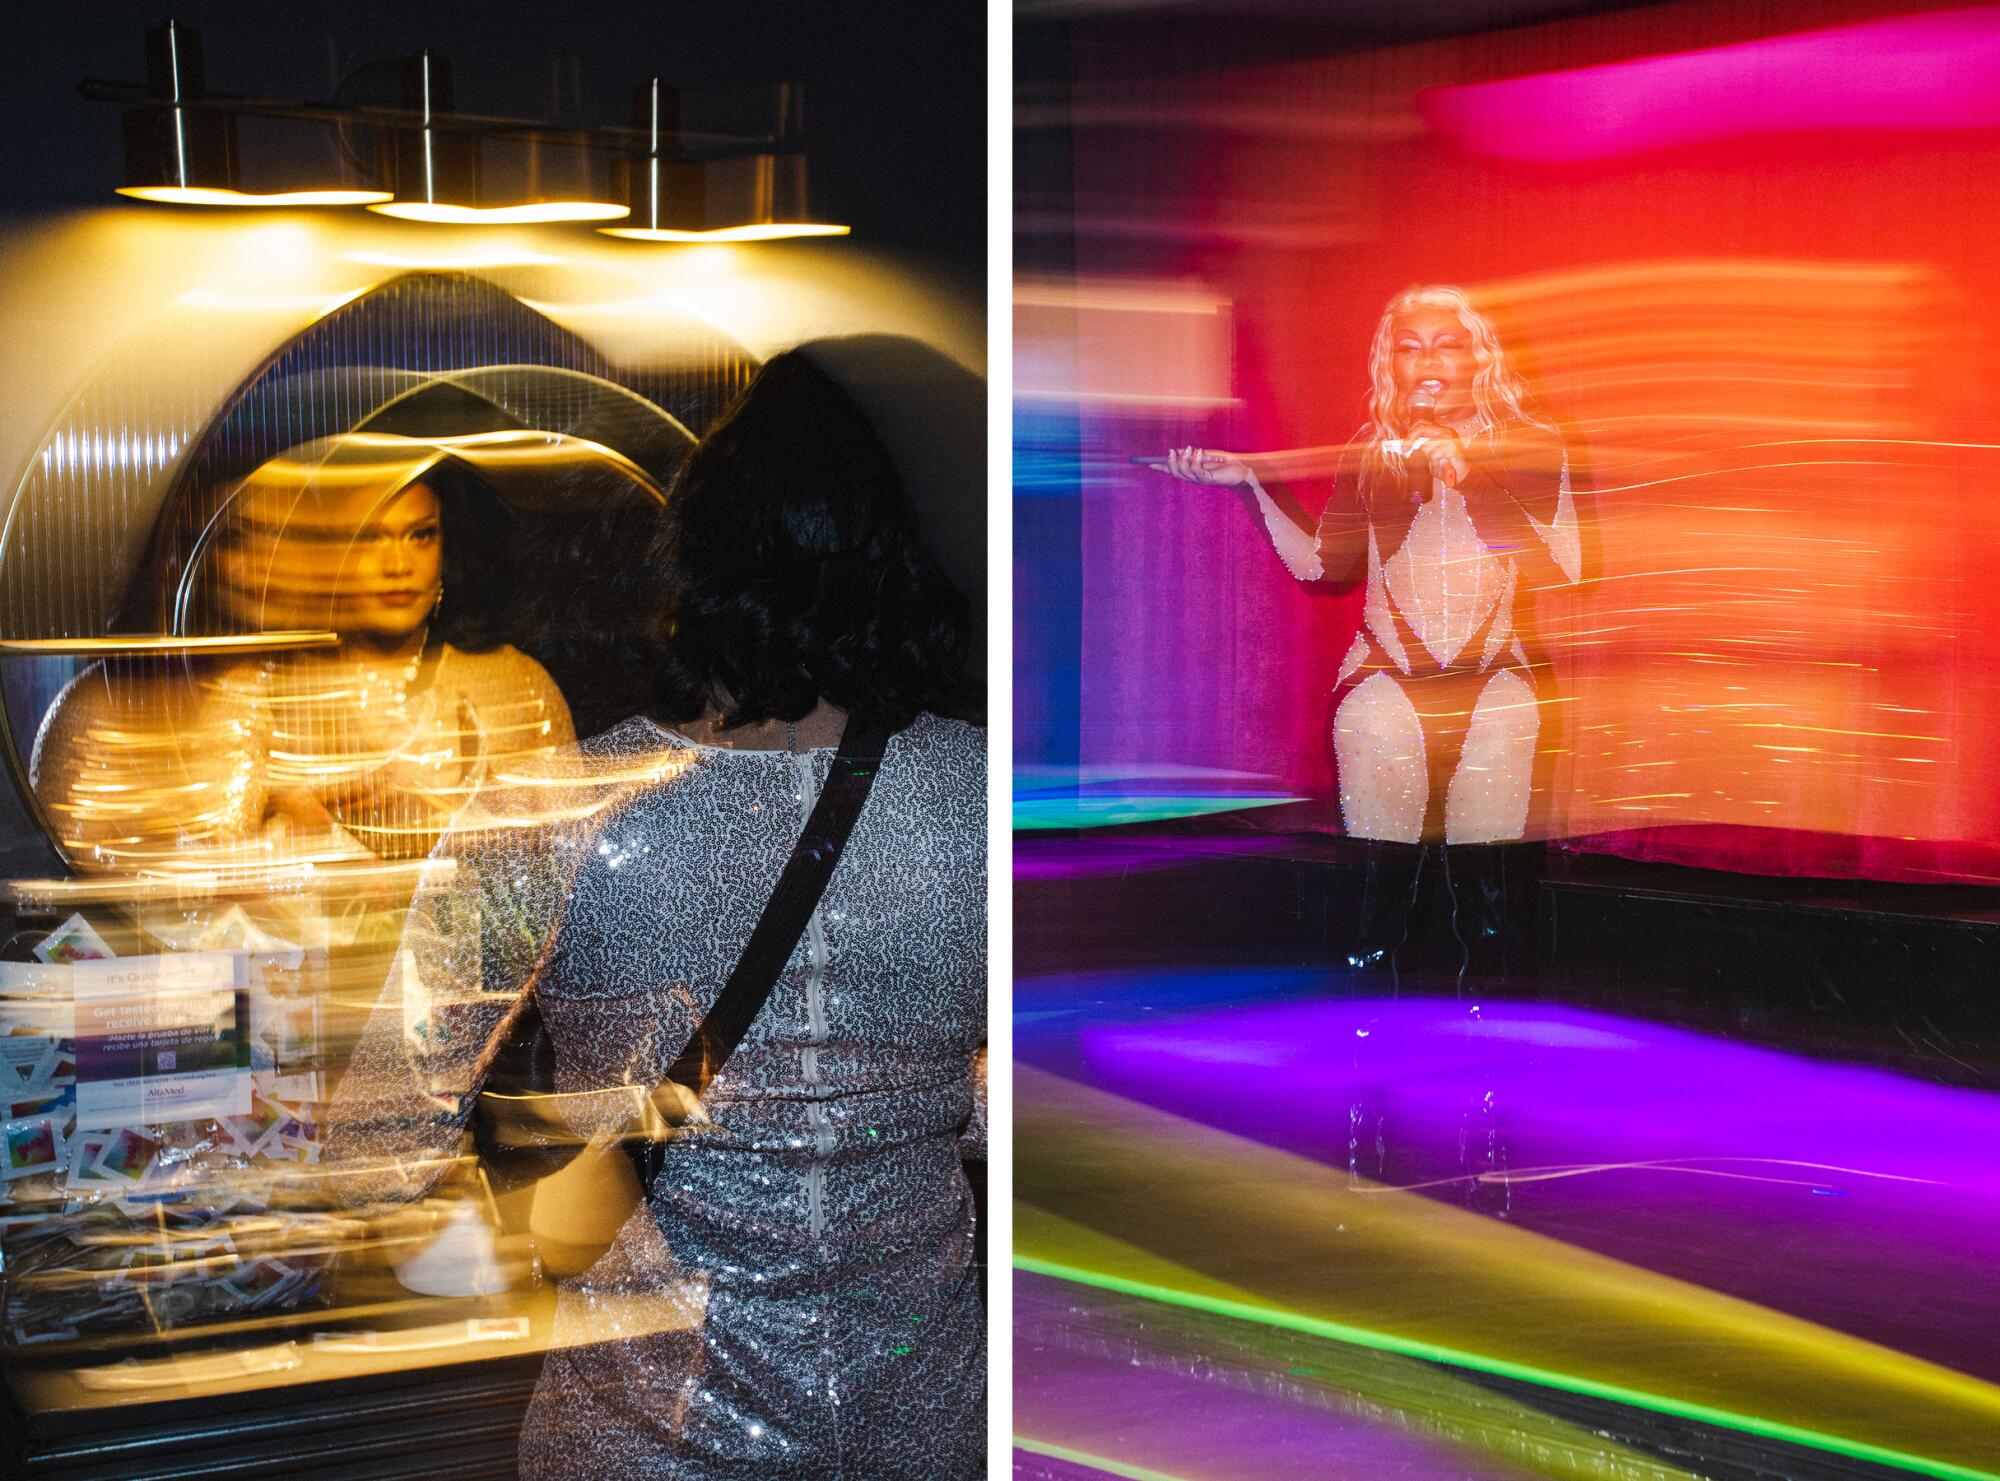 Two long-exposure photos side by side of drag queens, one looking in a mirror, one onstage.